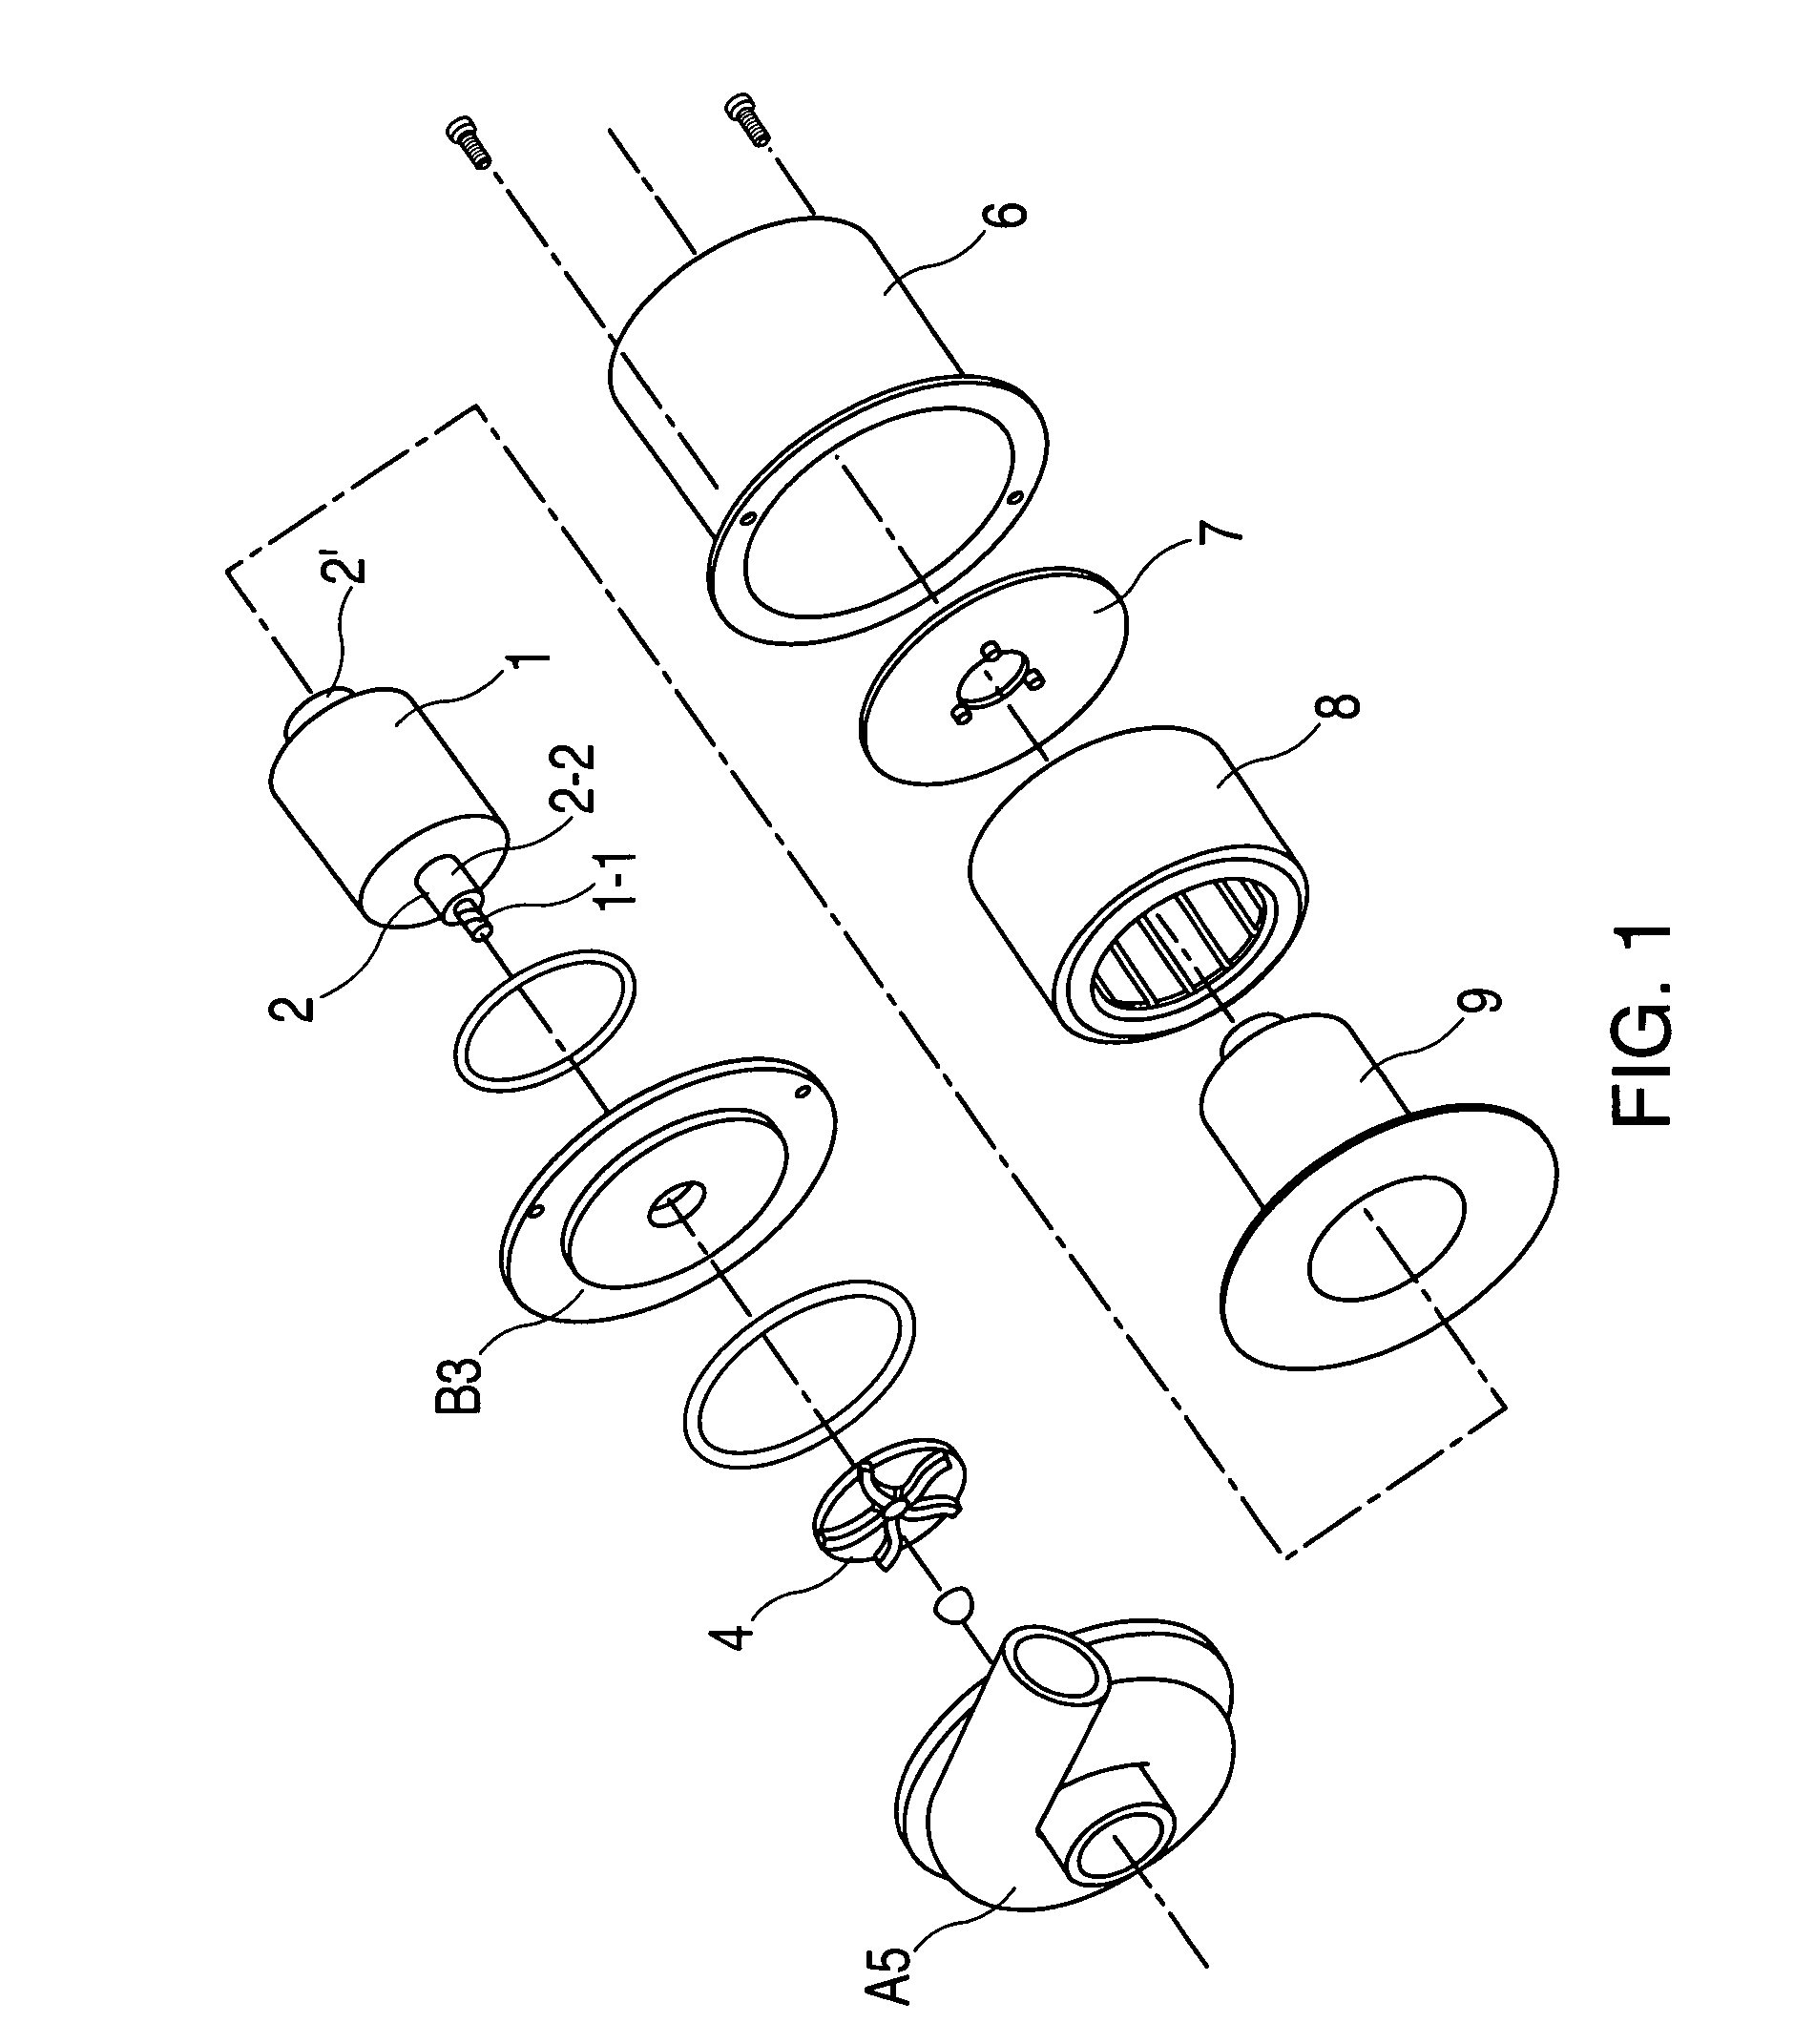 Electrically motorized pump having a submersible sleeve bearing